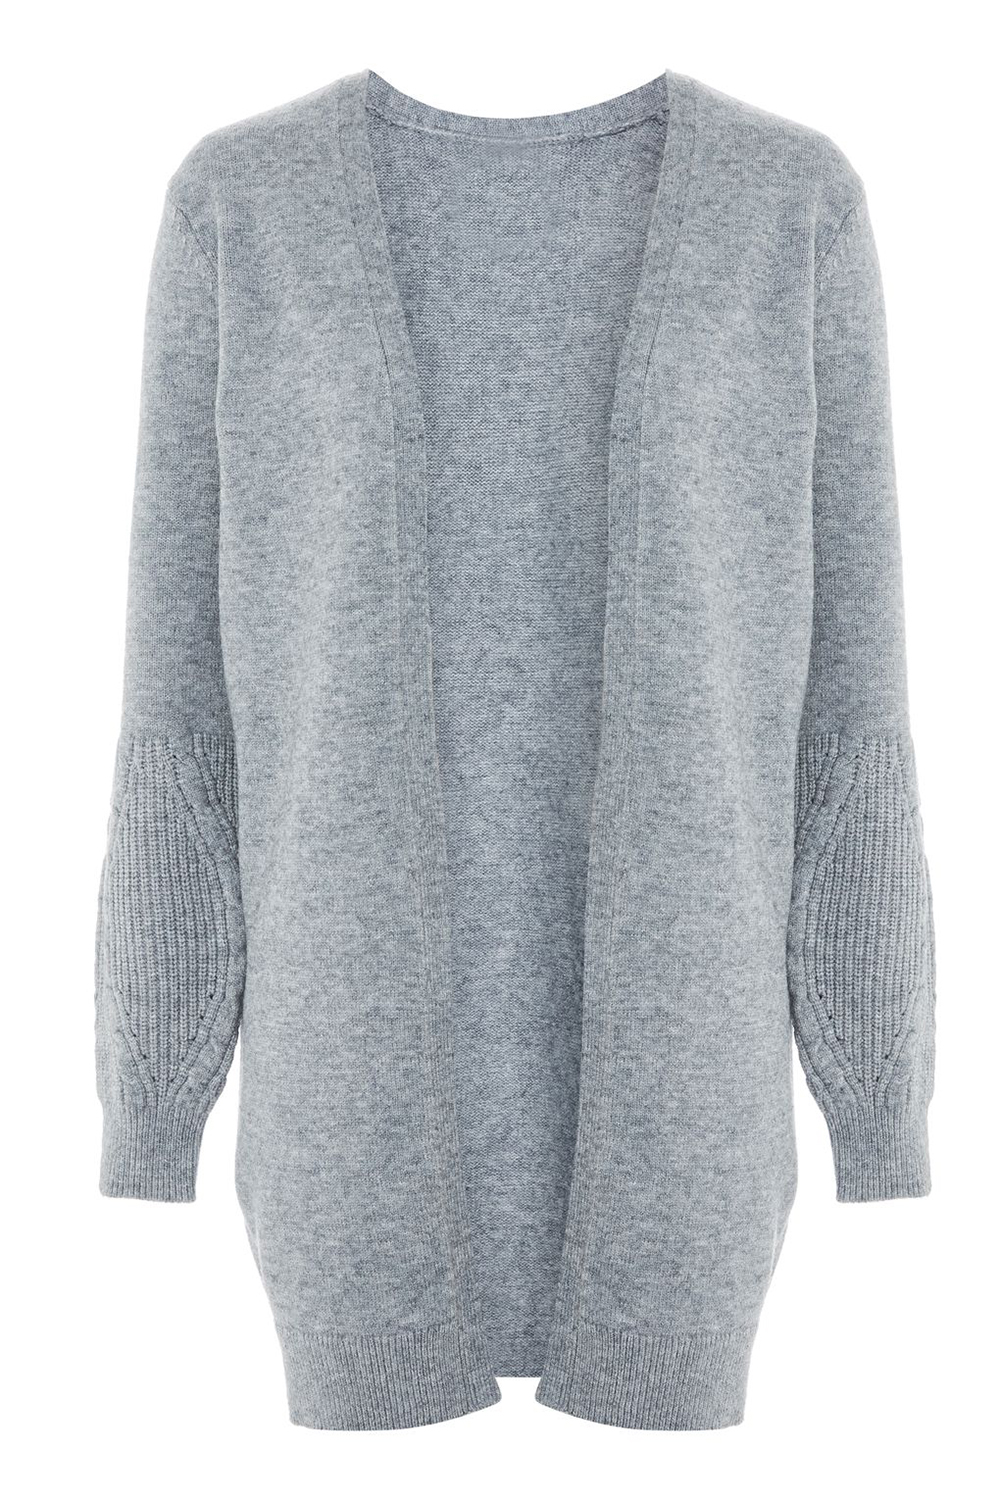 topshop-harper-knitted-cardigan-resized